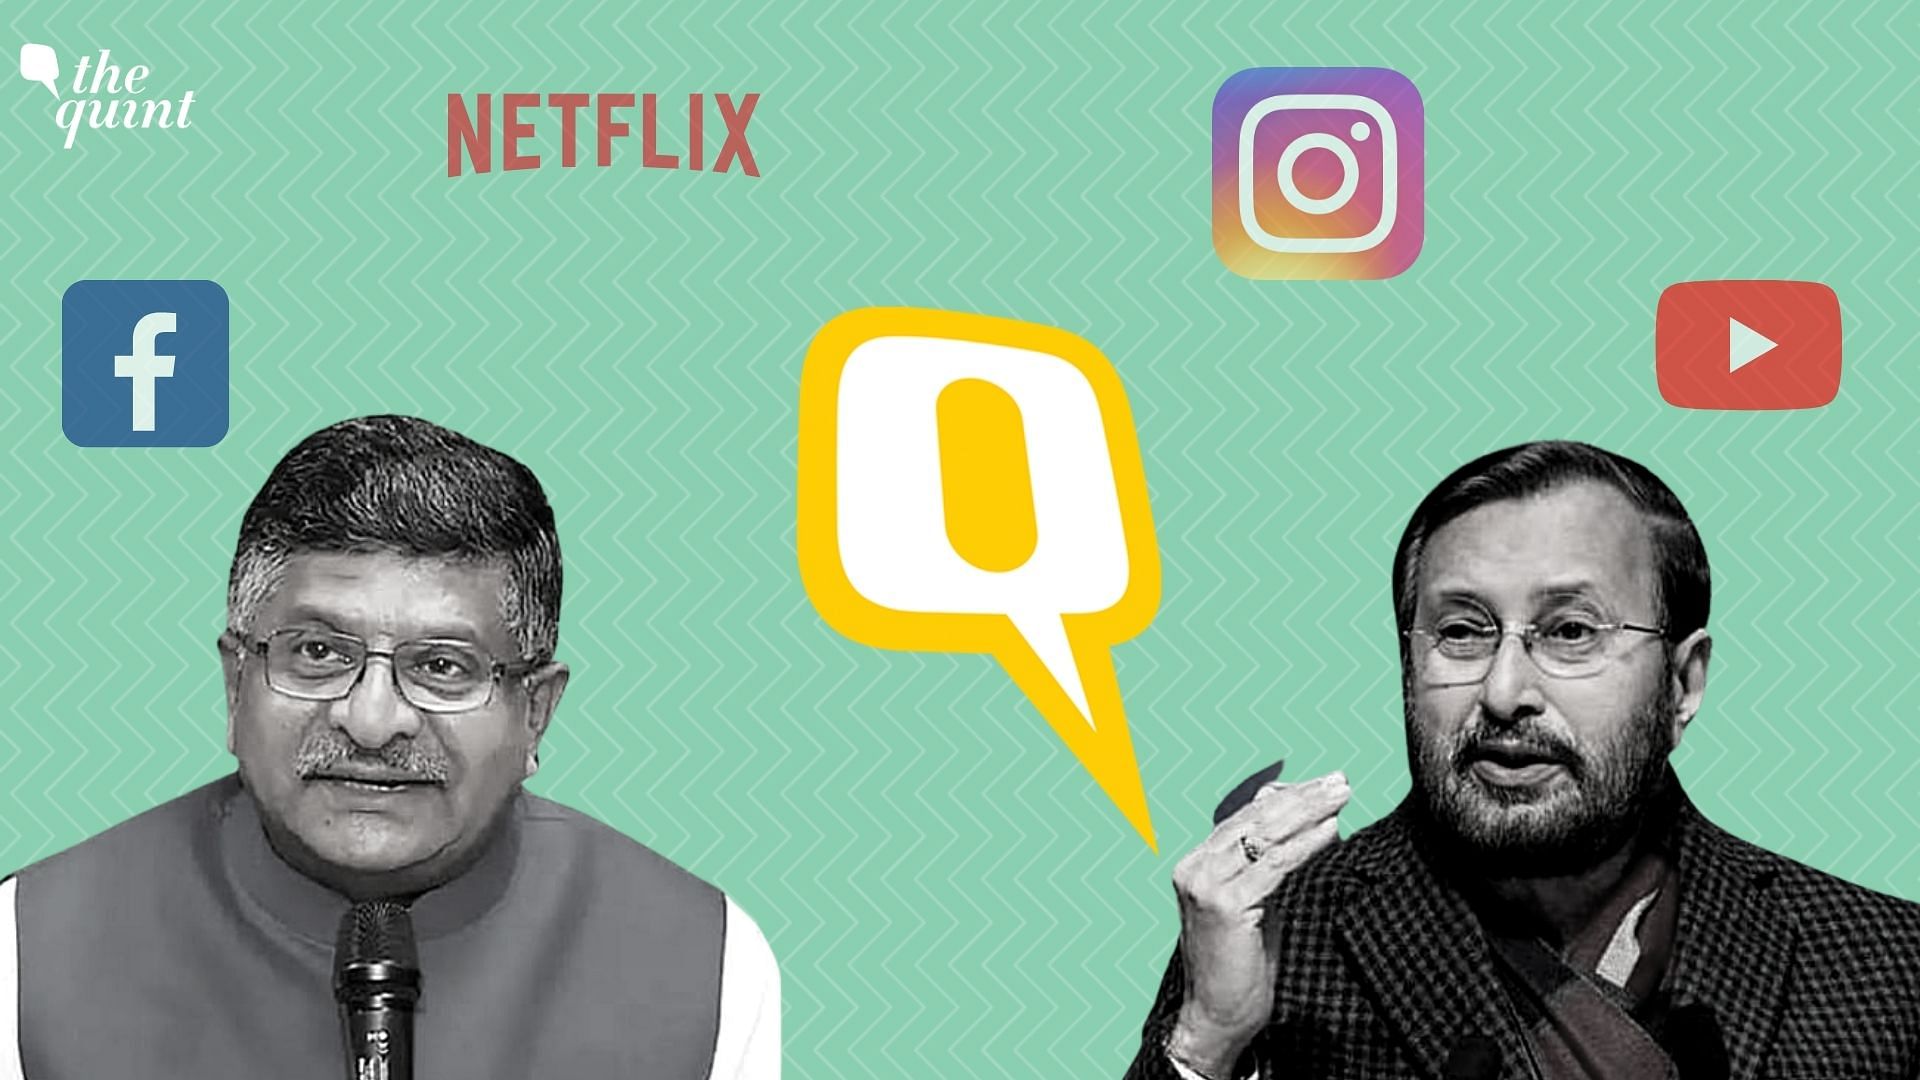 The Quint has moved the Delhi High Court, challenging the regulation of digital news portals under the newly released Information Technology (Guidelines for Intermediaries and Digital Media Ethics Code) Rules, 2021.